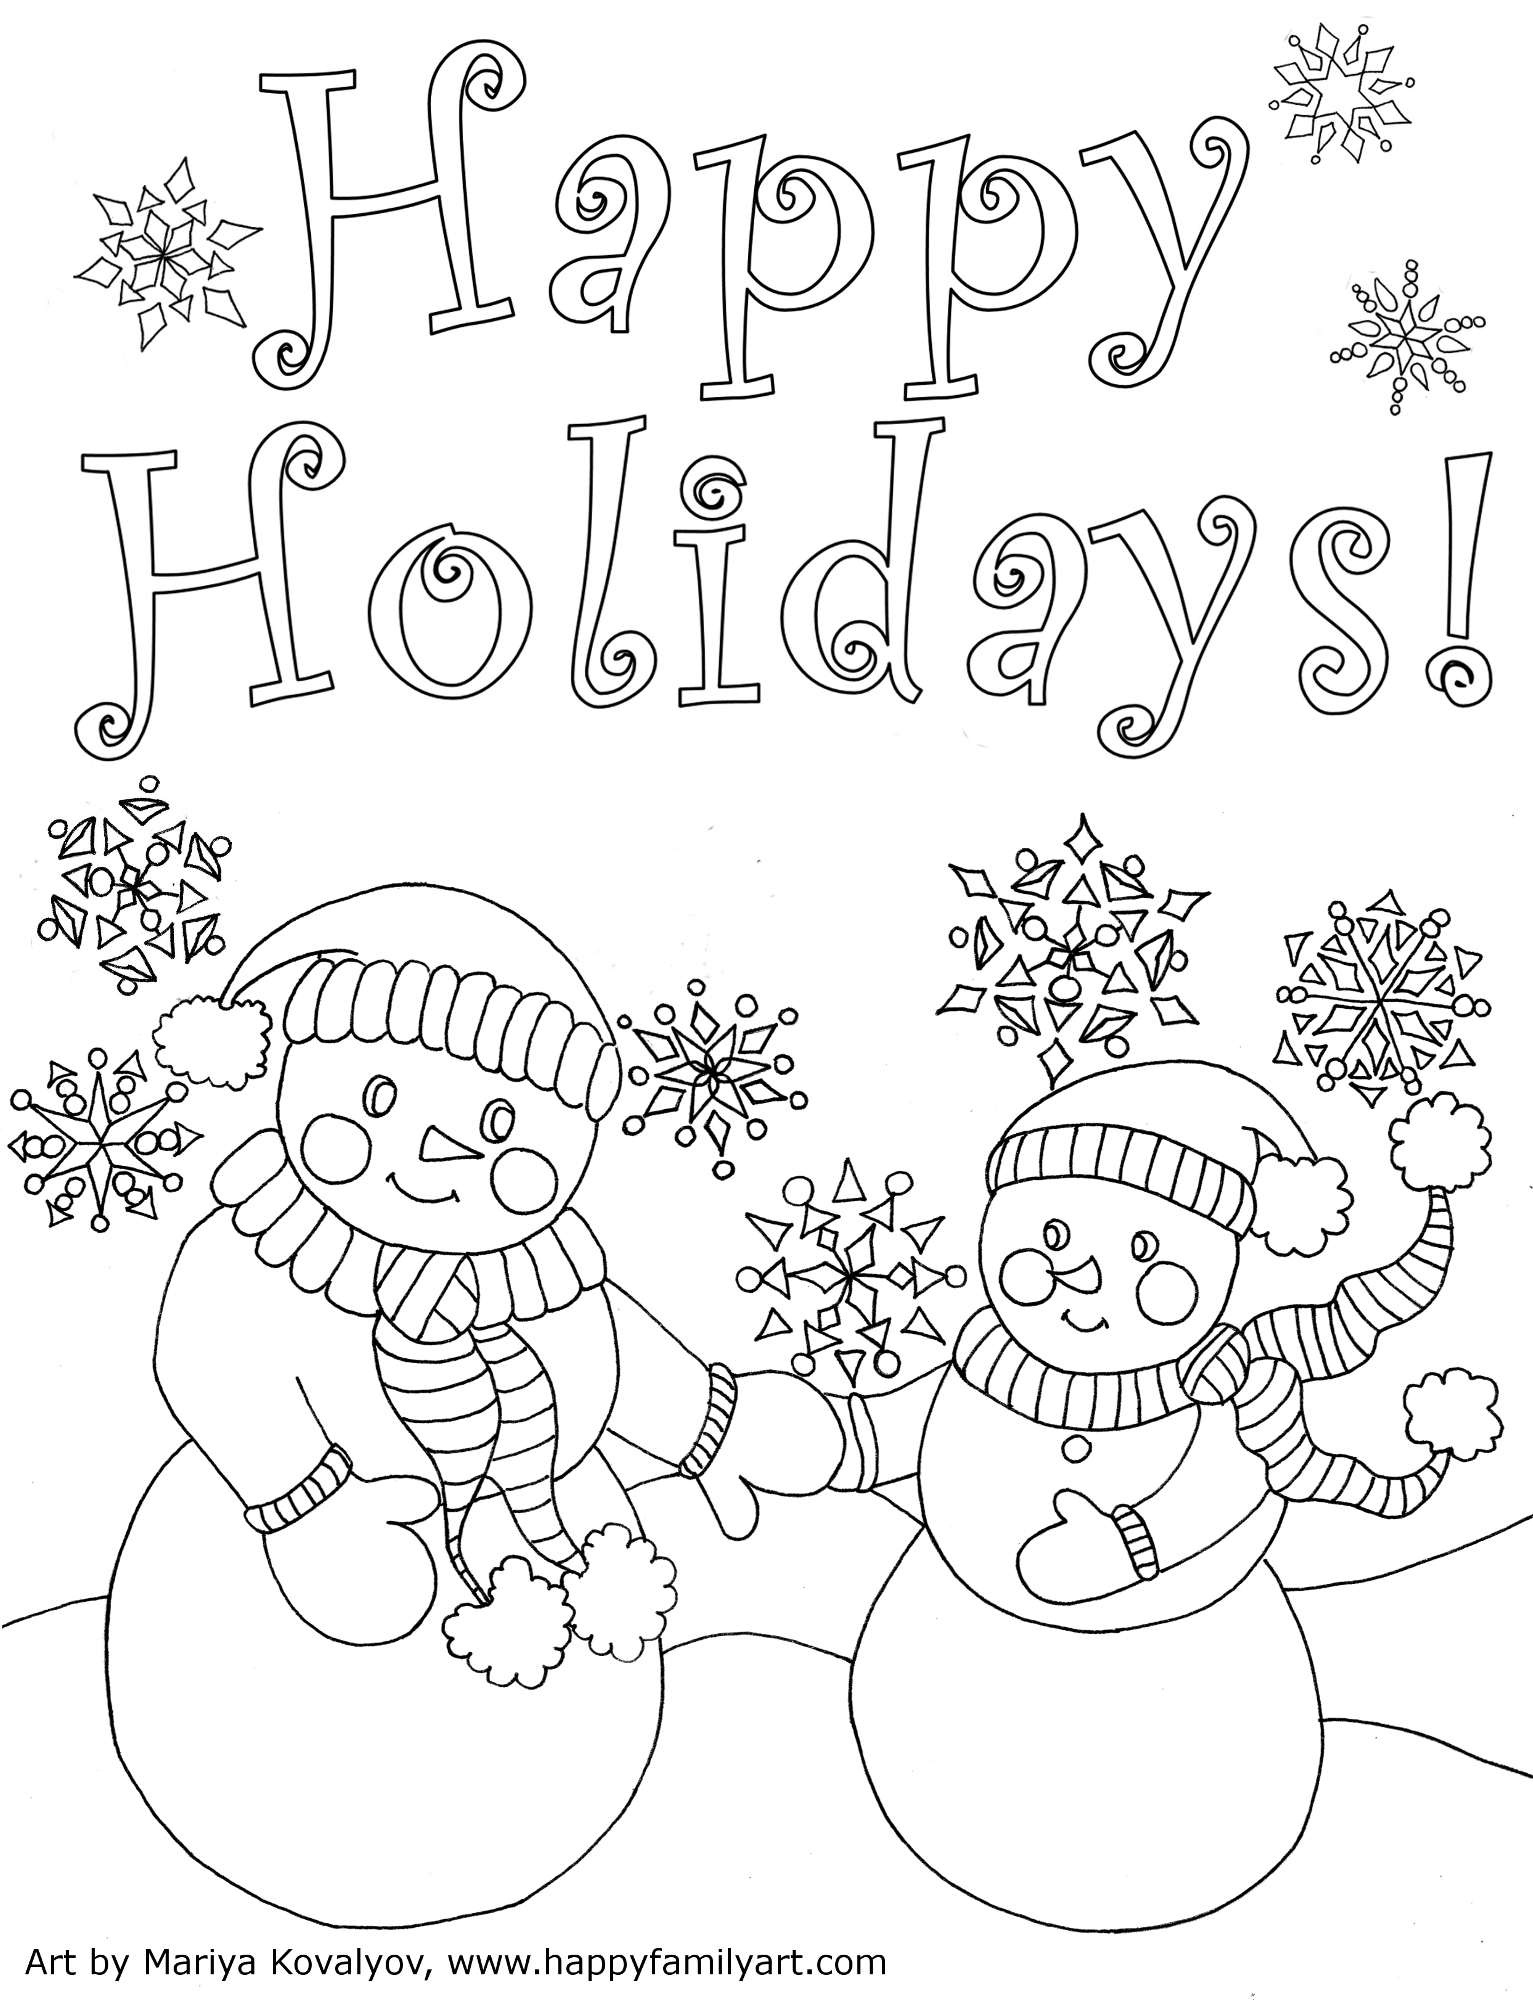 happy-family-art-original-and-fun-coloring-pages